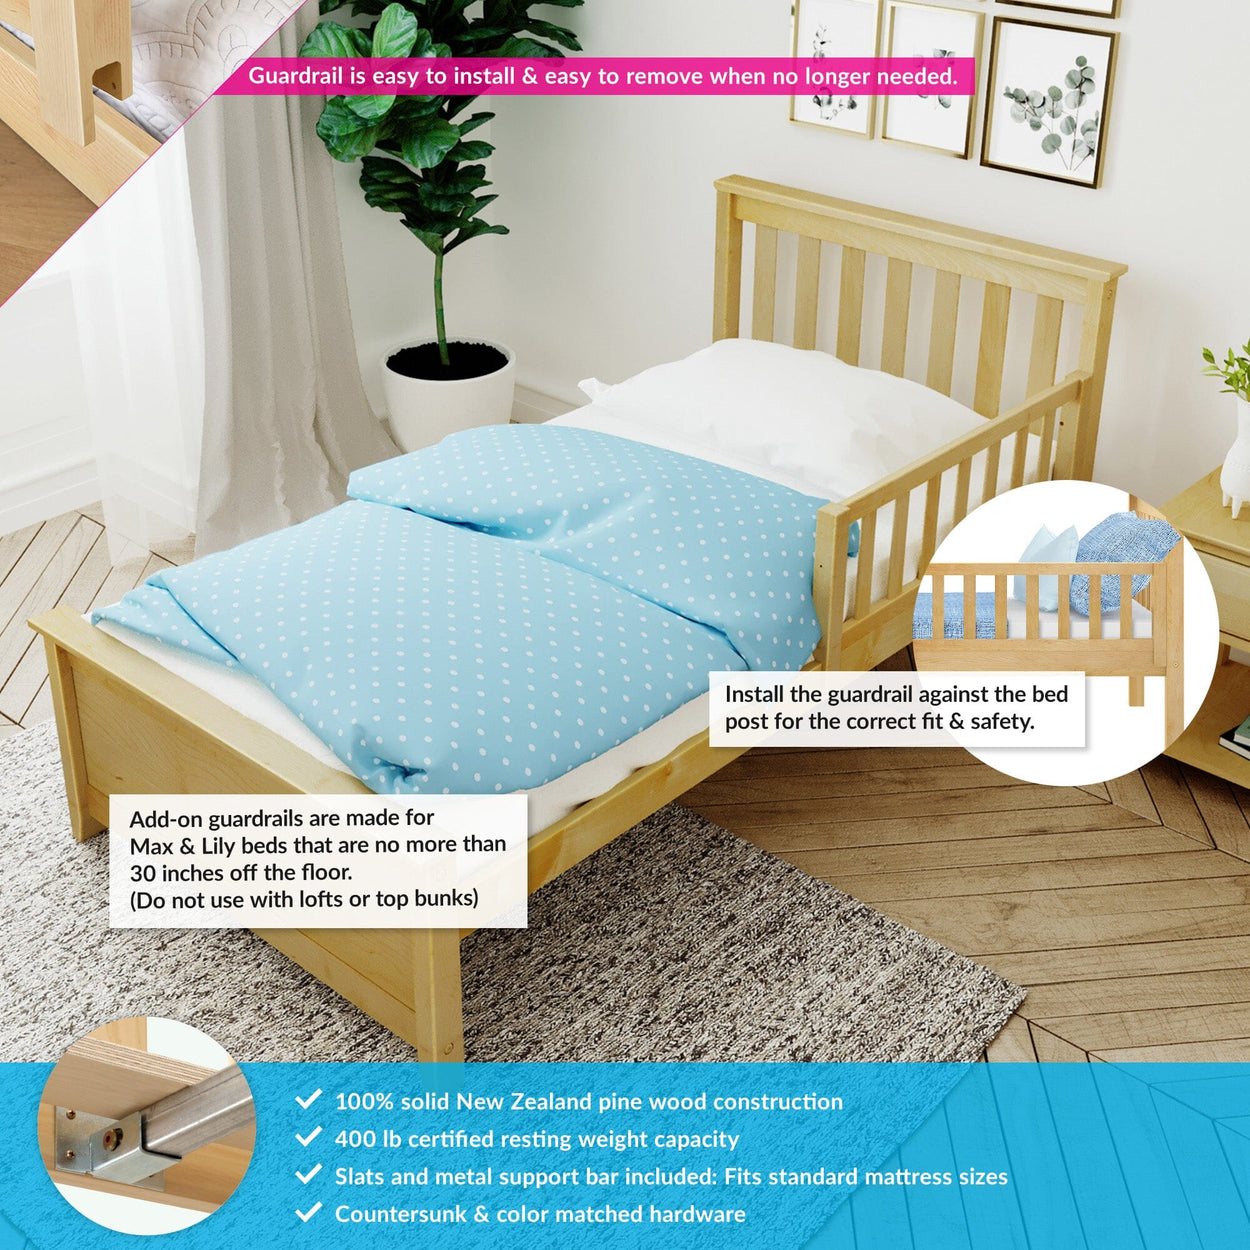 180210001109 : Kids Beds Twin Bed with Single Guard Rail, Natural